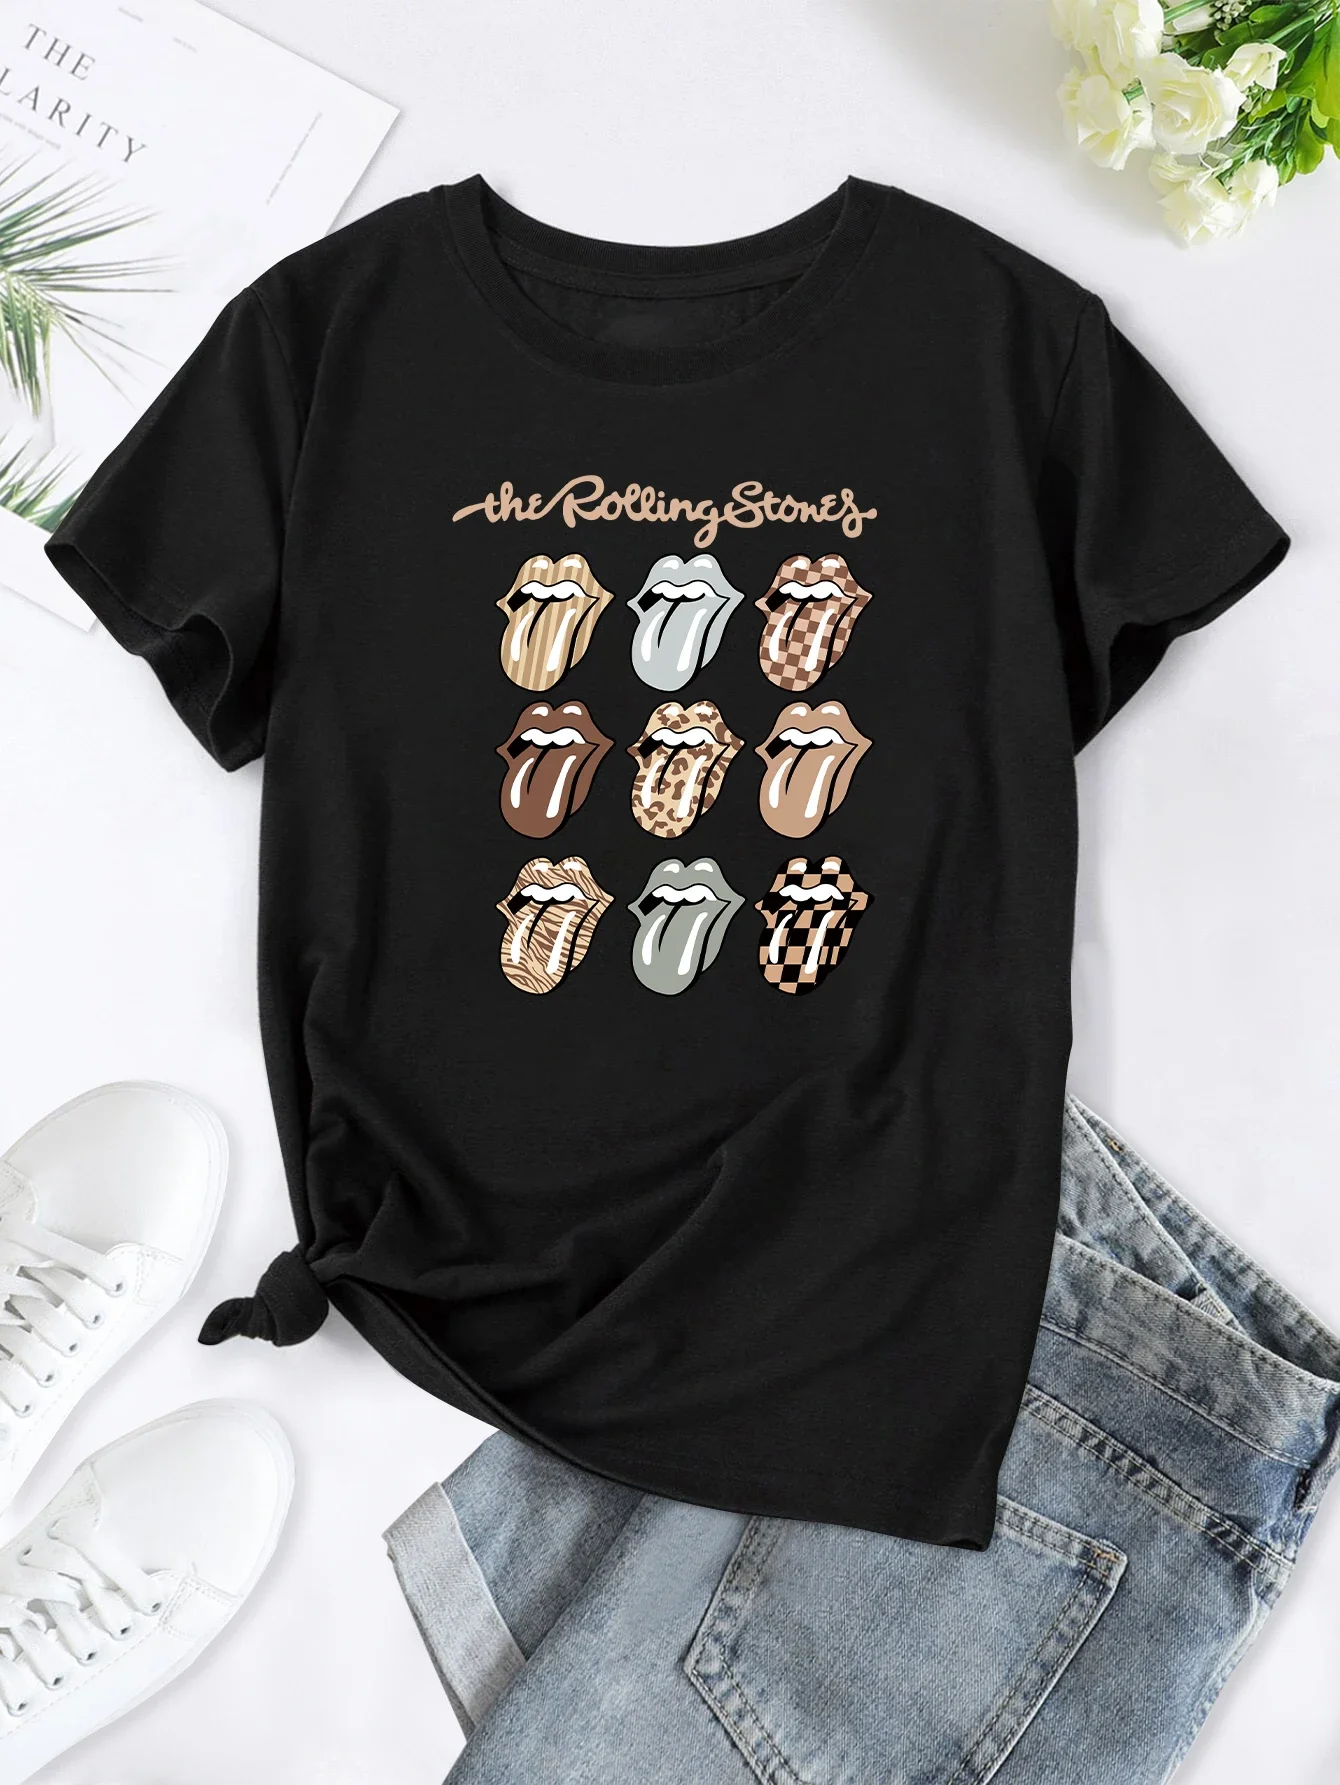 

Plus Size 'The rolling stones' Tee,Print Crew Neck T-shirt,Women's Casual Loose Short Sleeve Fashion Summer T-Shirts Tops